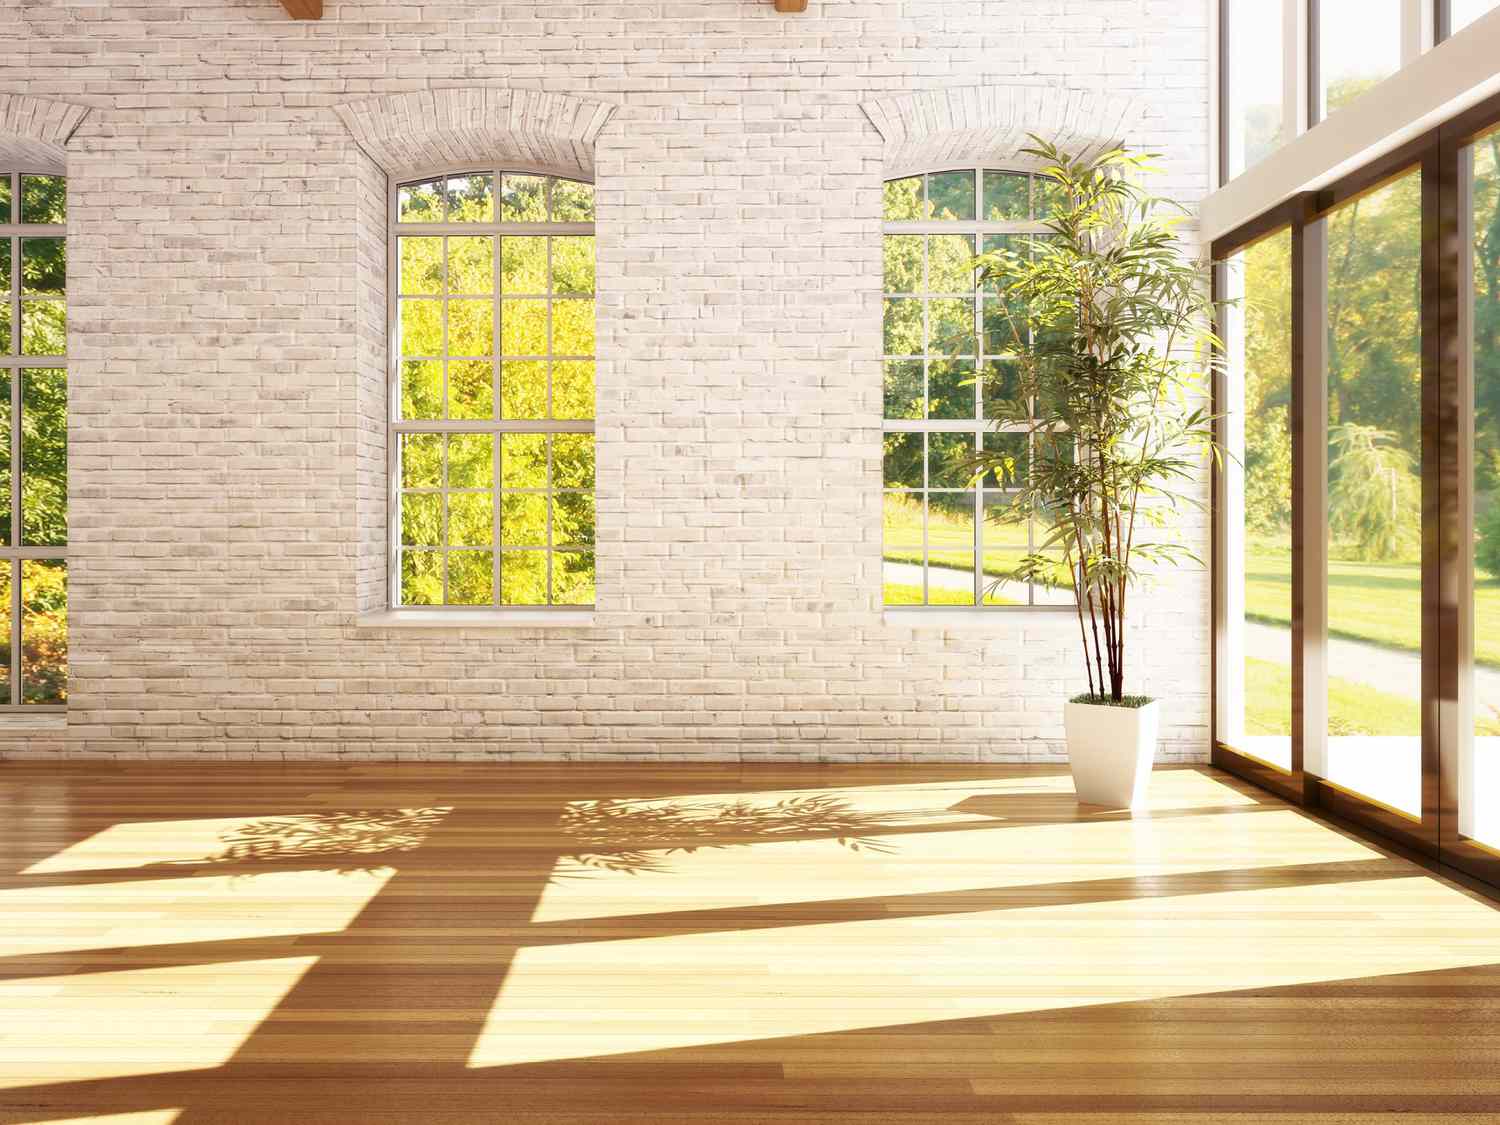 hardwood floors with natural light and a potted plant